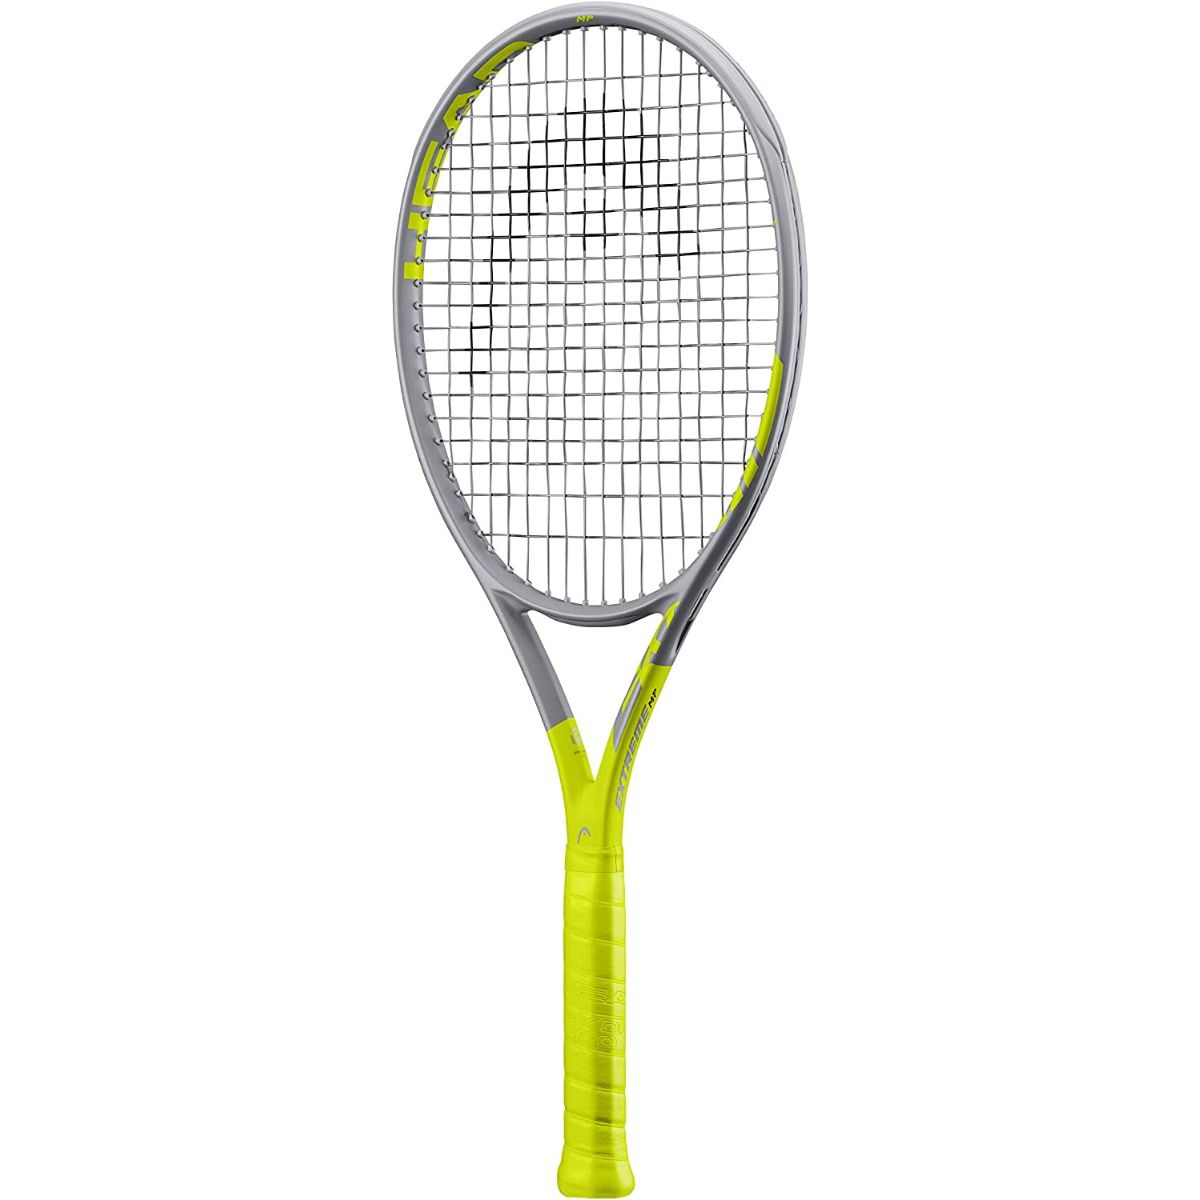 The Best Tennis Rackets for Advanced Players Options: Head Graphene 360+ Extreme MP